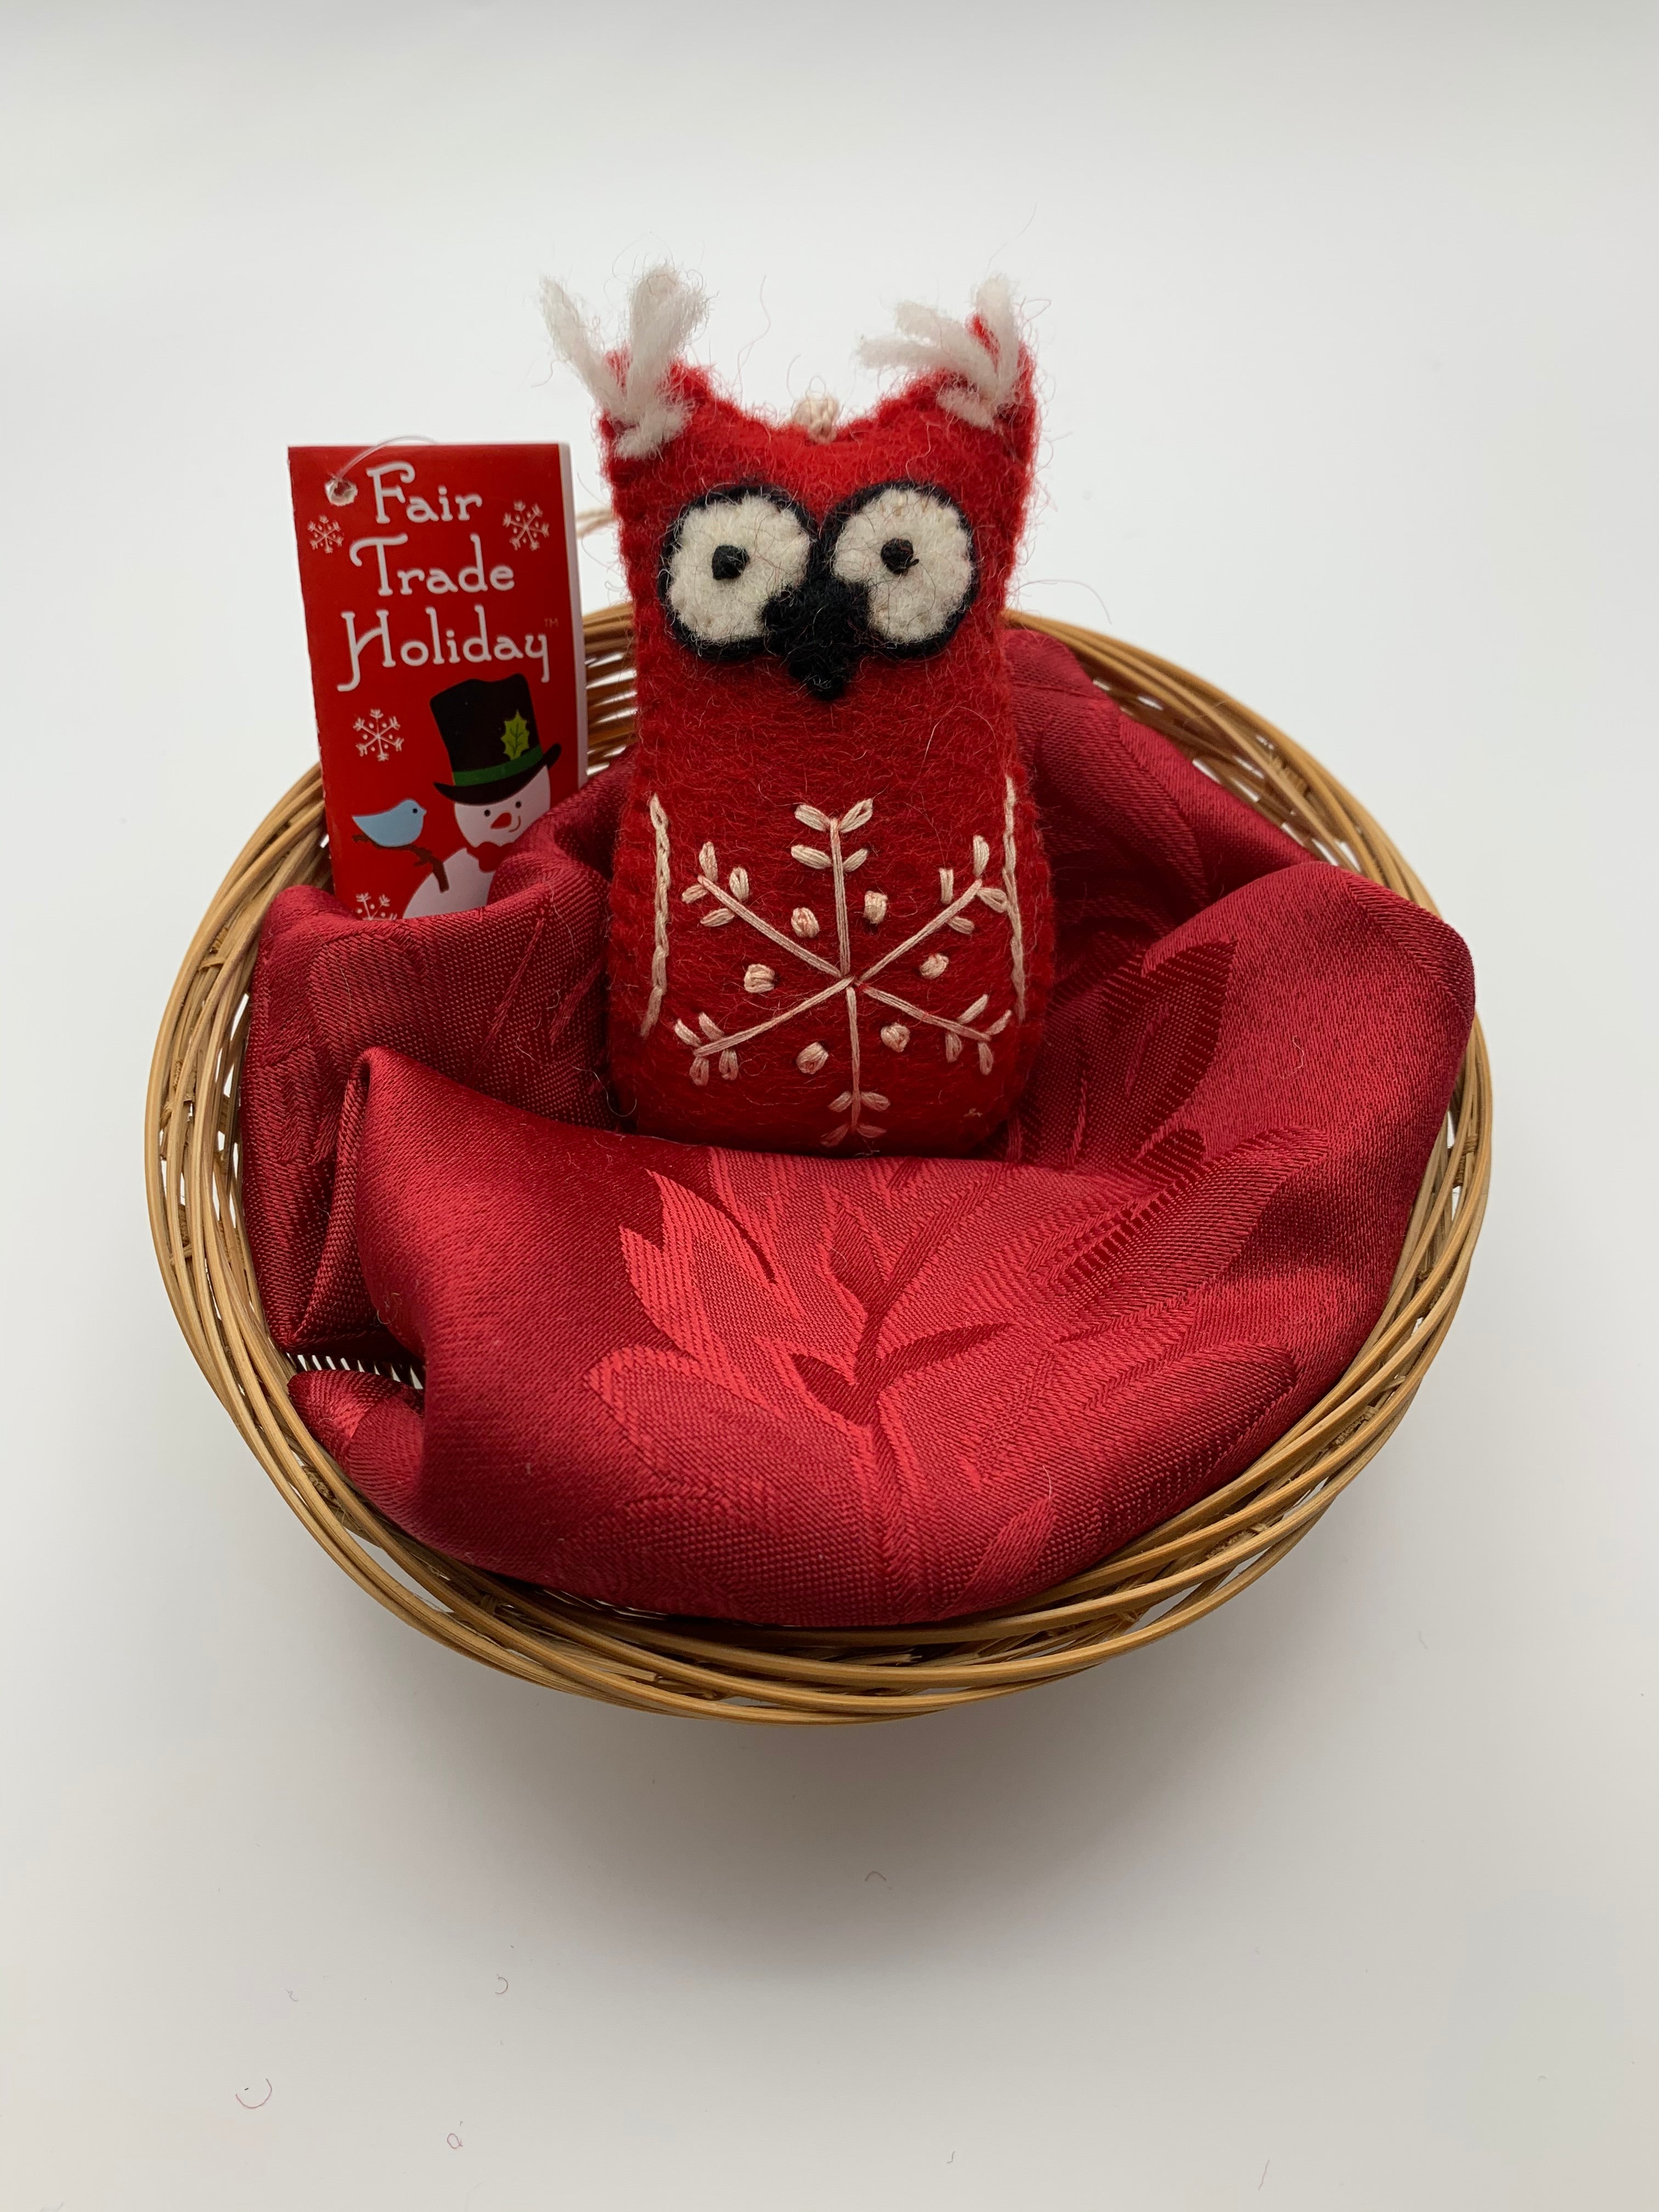 This is  a red owl Christmas ornament that is handcrafted (fair trade) and made of 100% hand-felted natural wool. It is red with black and white accents and tufts of white hair on its ears & has a 'signature' (white) snowflake on its belly. Approximately 4"x2.5".  Comes with a fair trade holiday "to/from" tag to use if giving this as a gift.